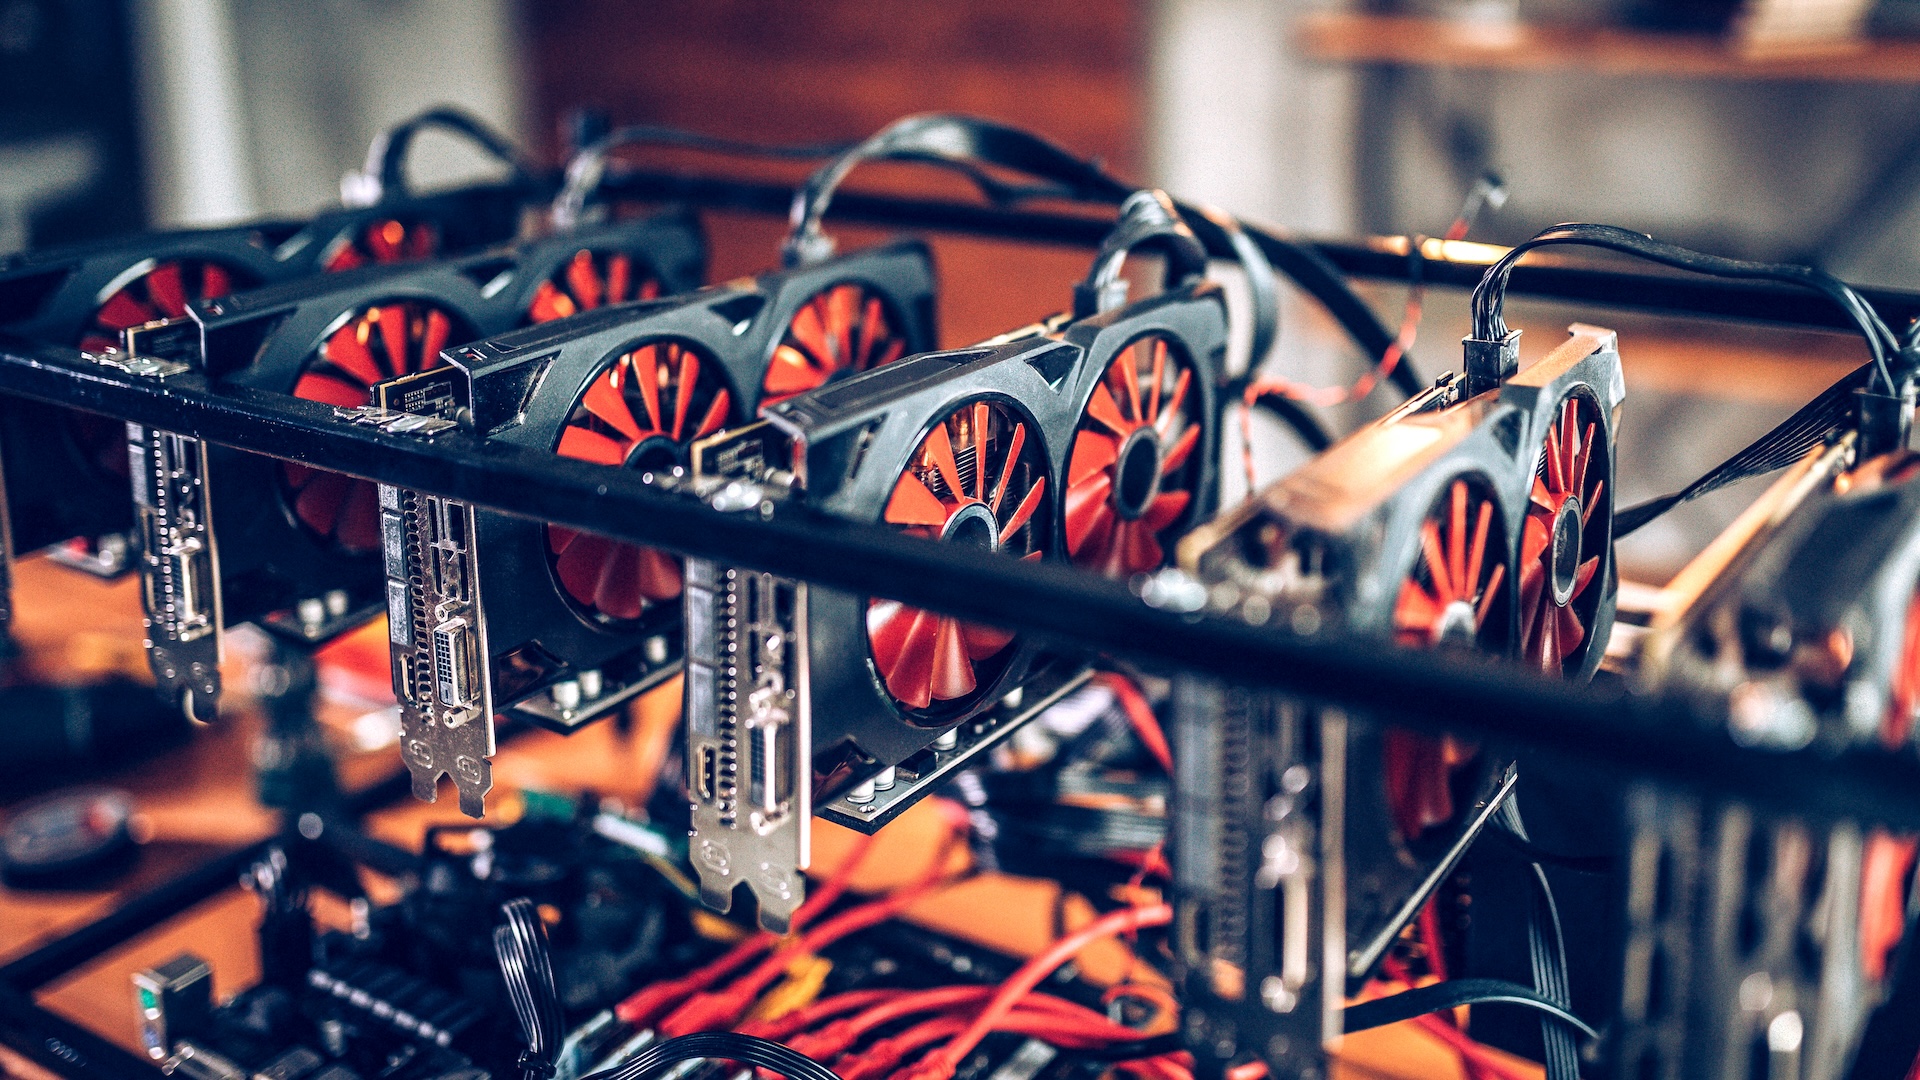 A close-up of a crypto mining rig